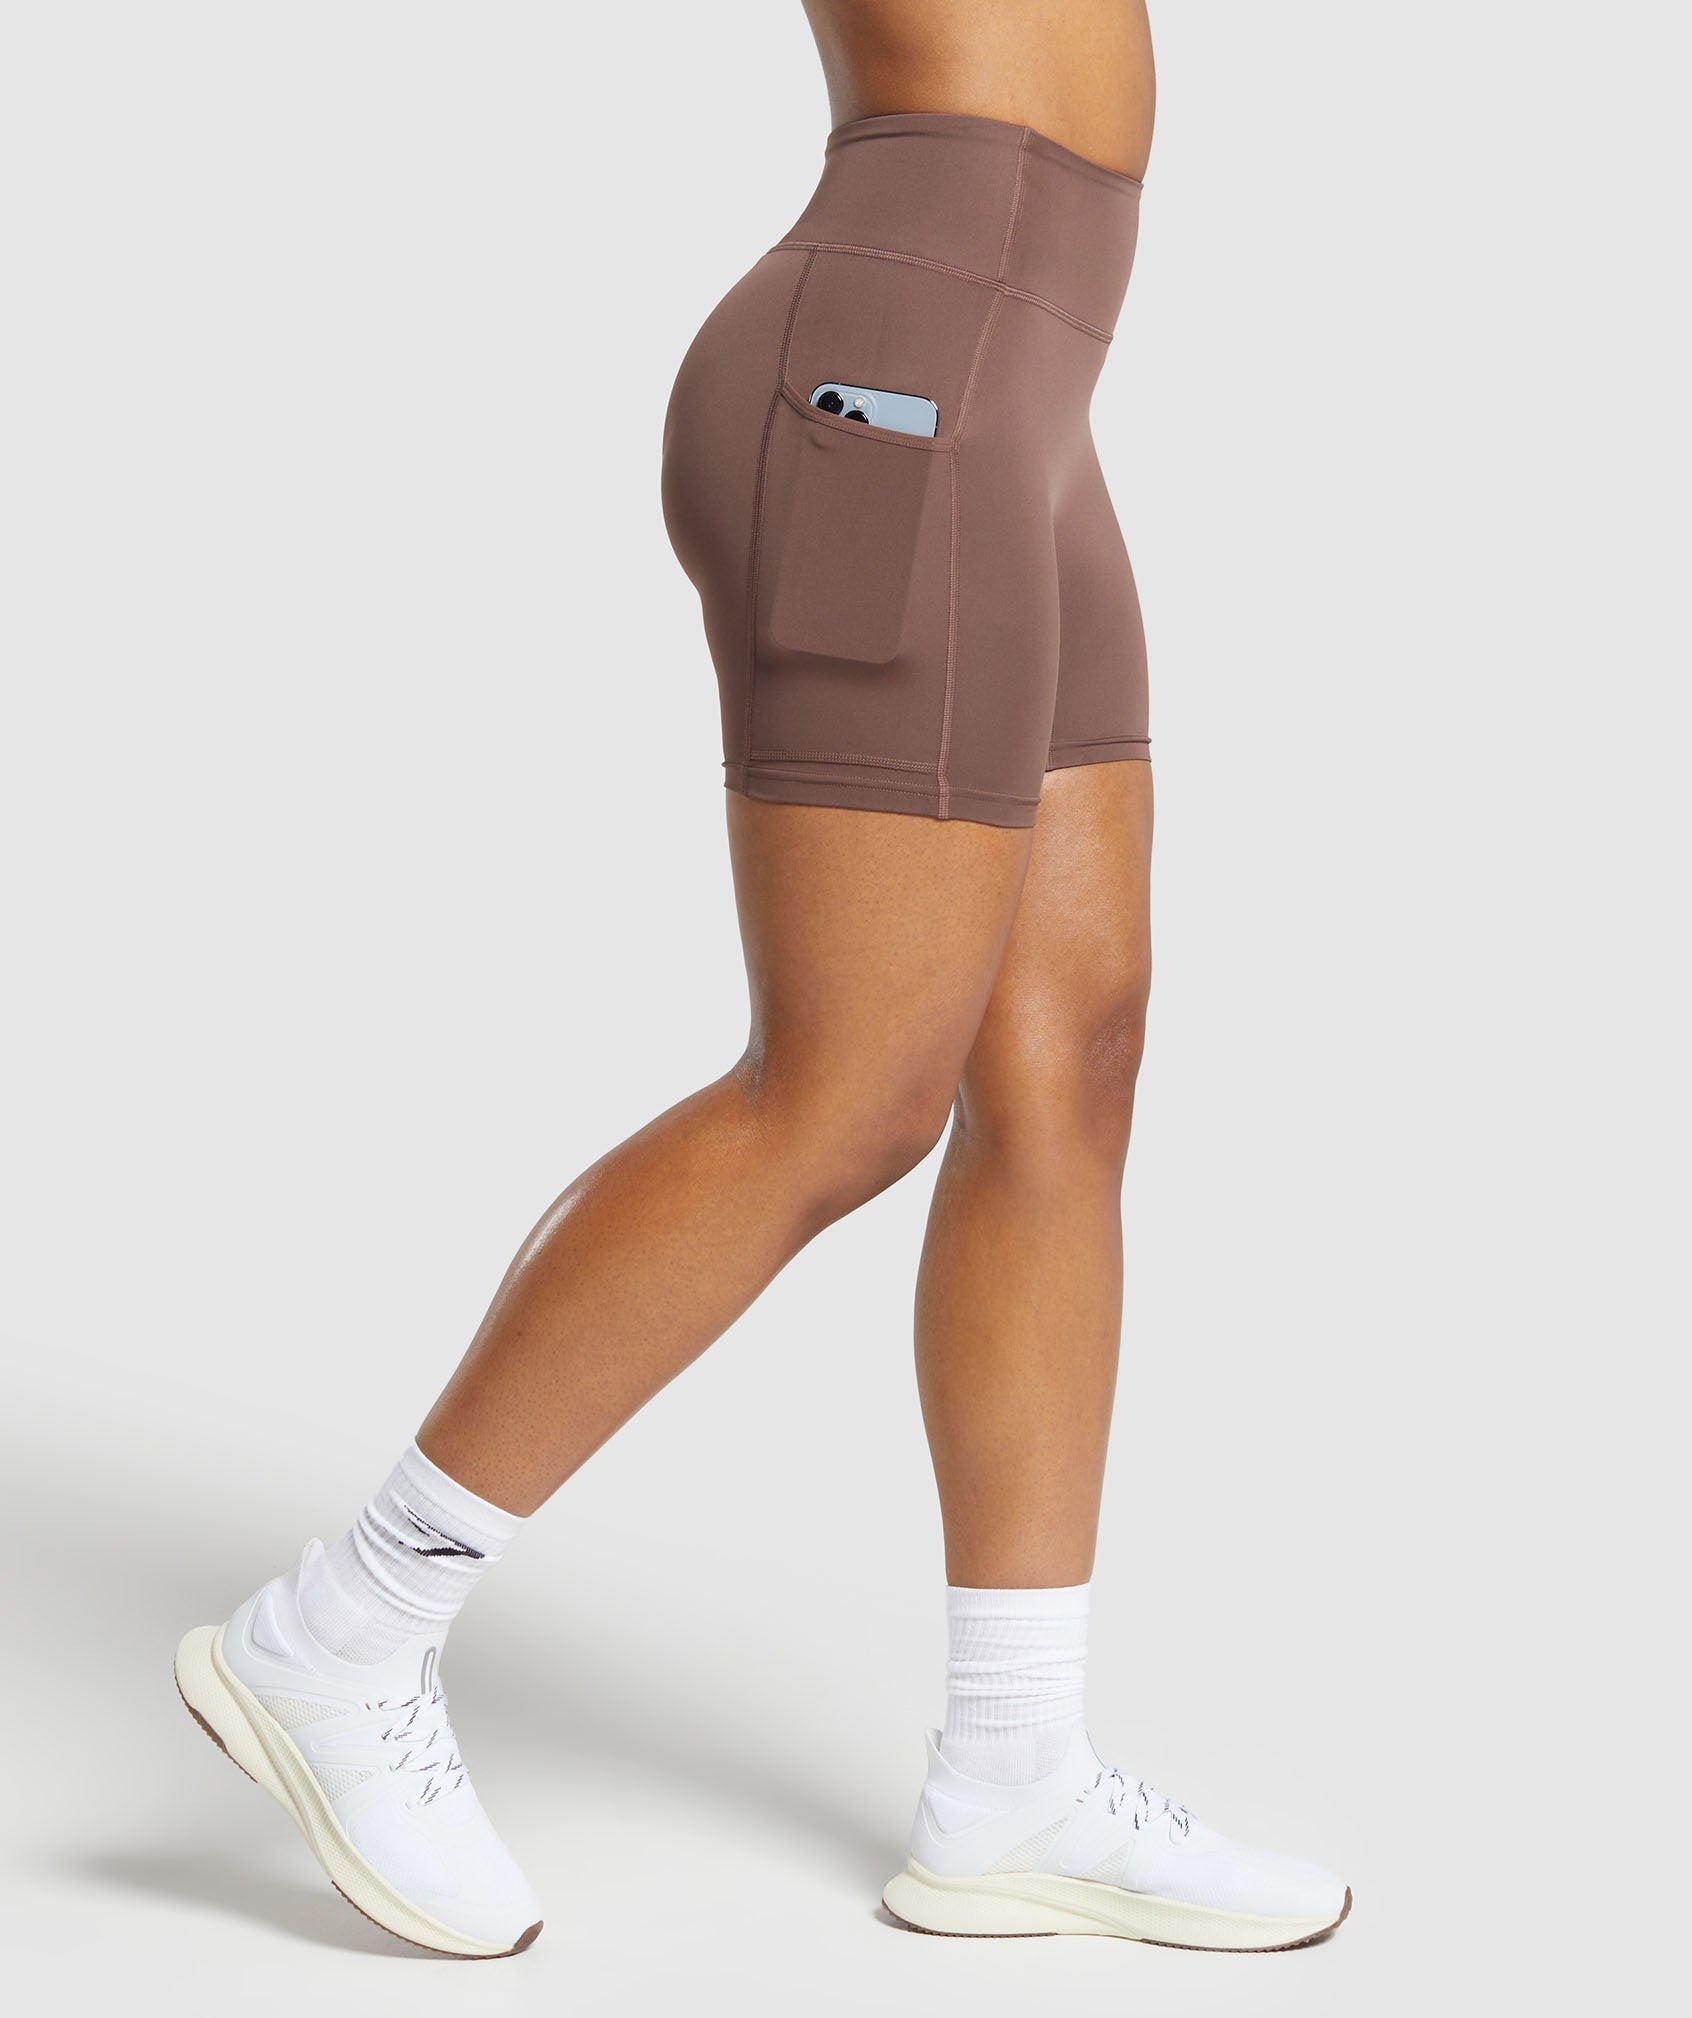 Pocket Shorts in Soft Brown is out of stock